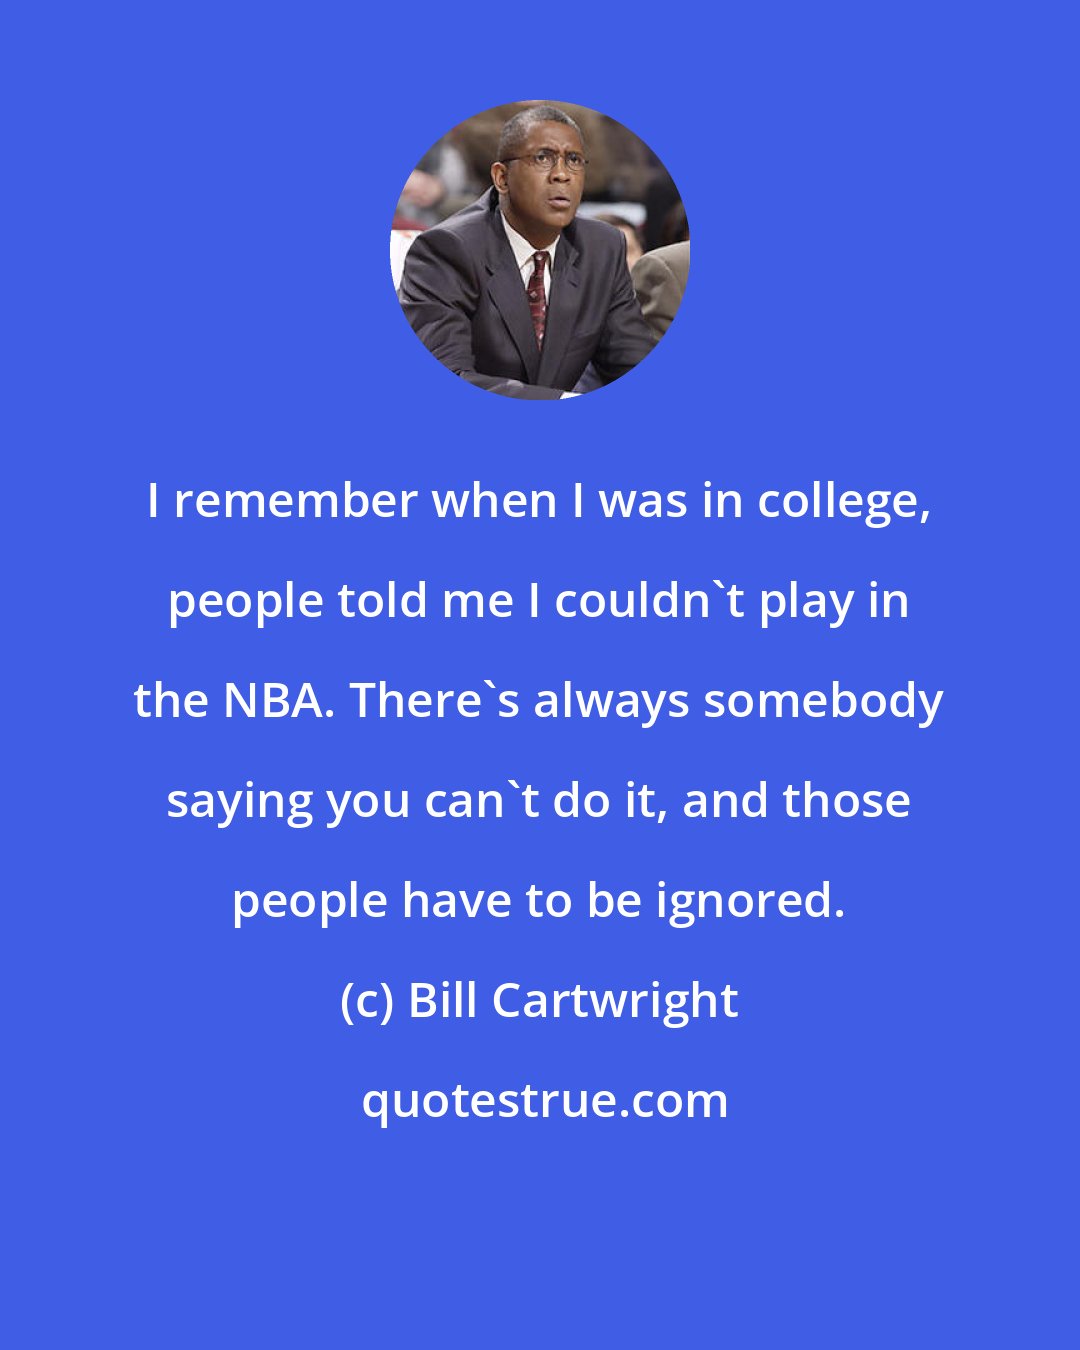 Bill Cartwright: I remember when I was in college, people told me I couldn't play in the NBA. There's always somebody saying you can't do it, and those people have to be ignored.